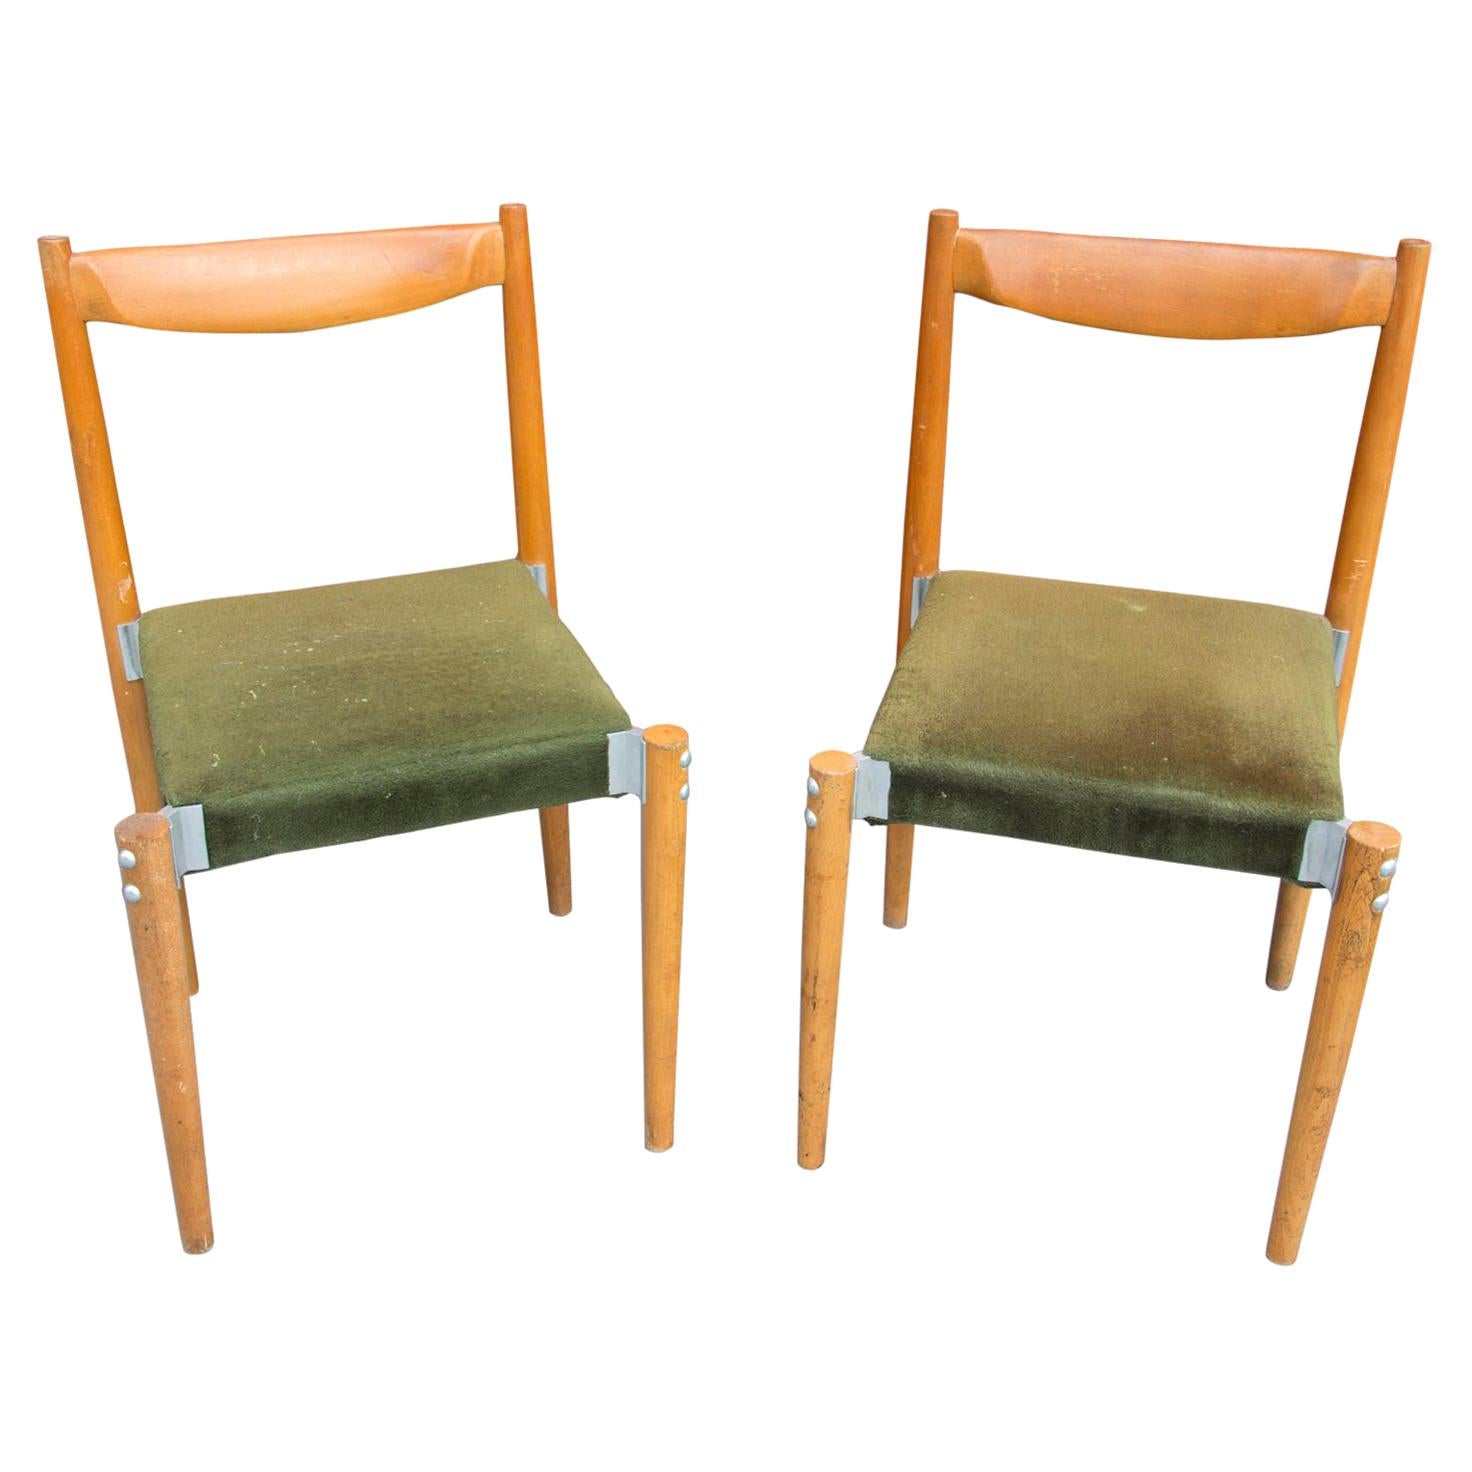 Pair of Czech Dinning Chairs, Designed by M. Navratil, 1970s